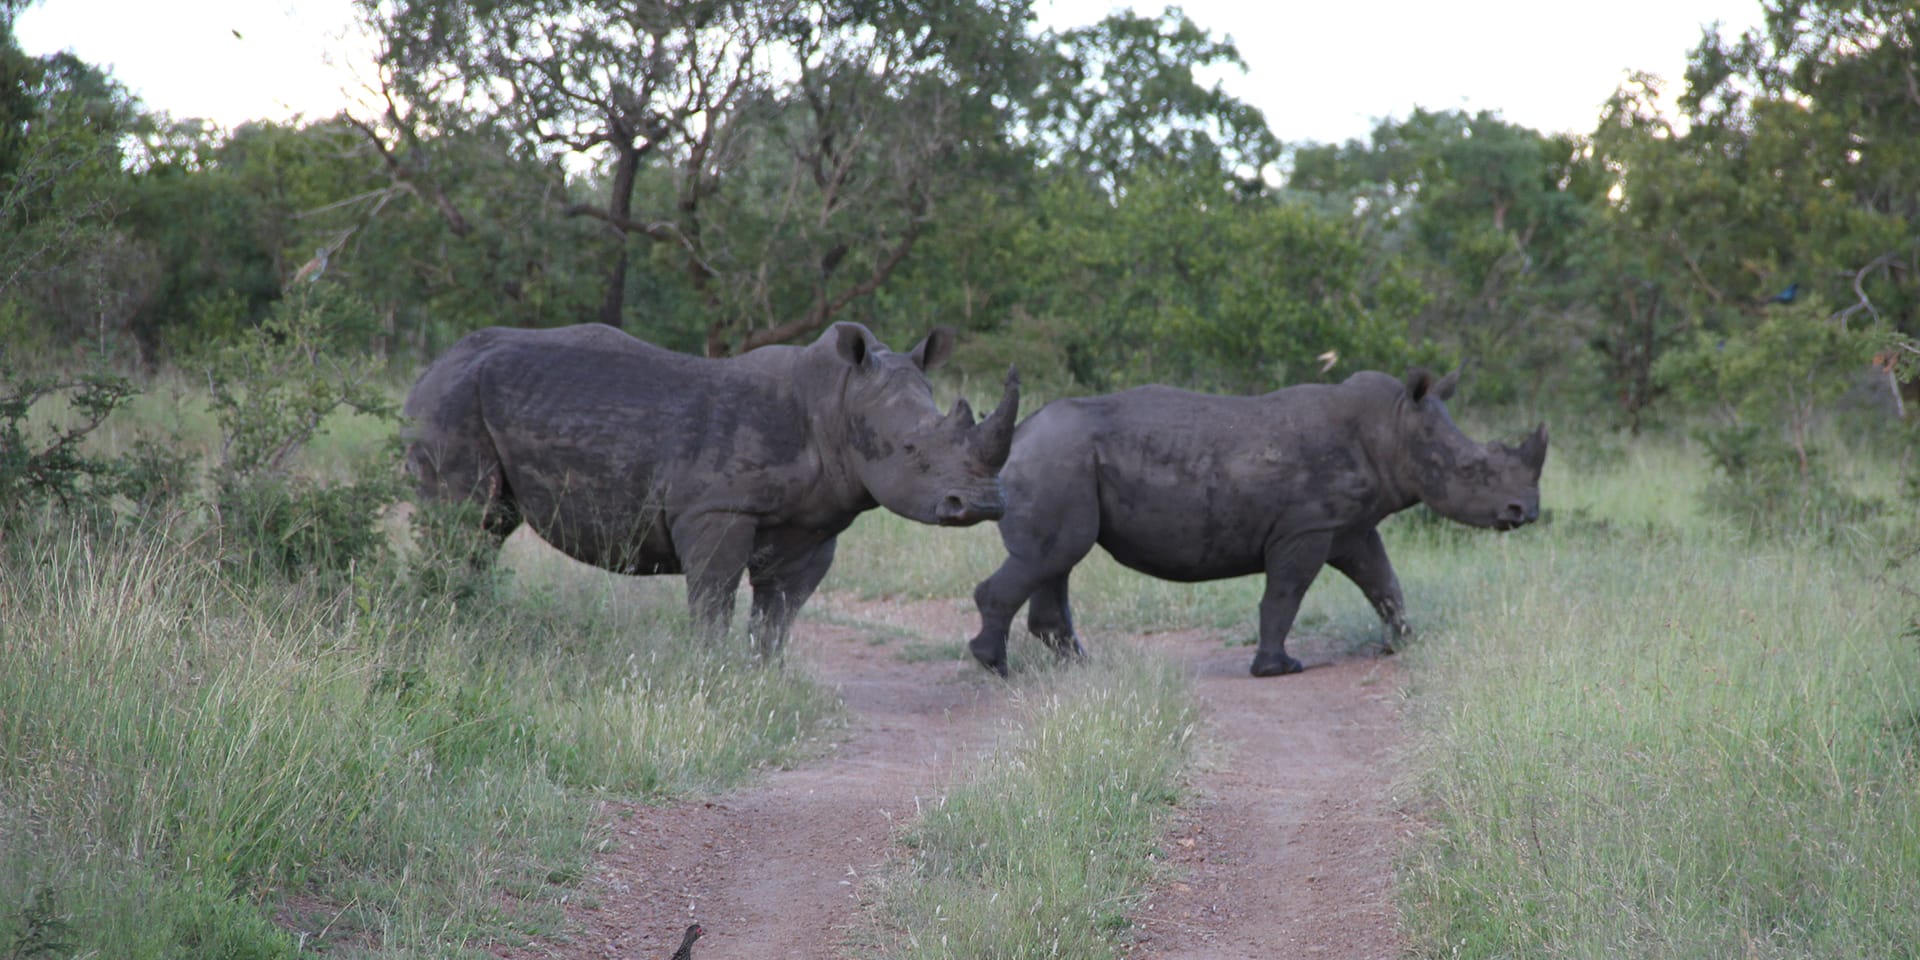 A pair of rhinoceros crossing a dirt road with several tall trees in the background